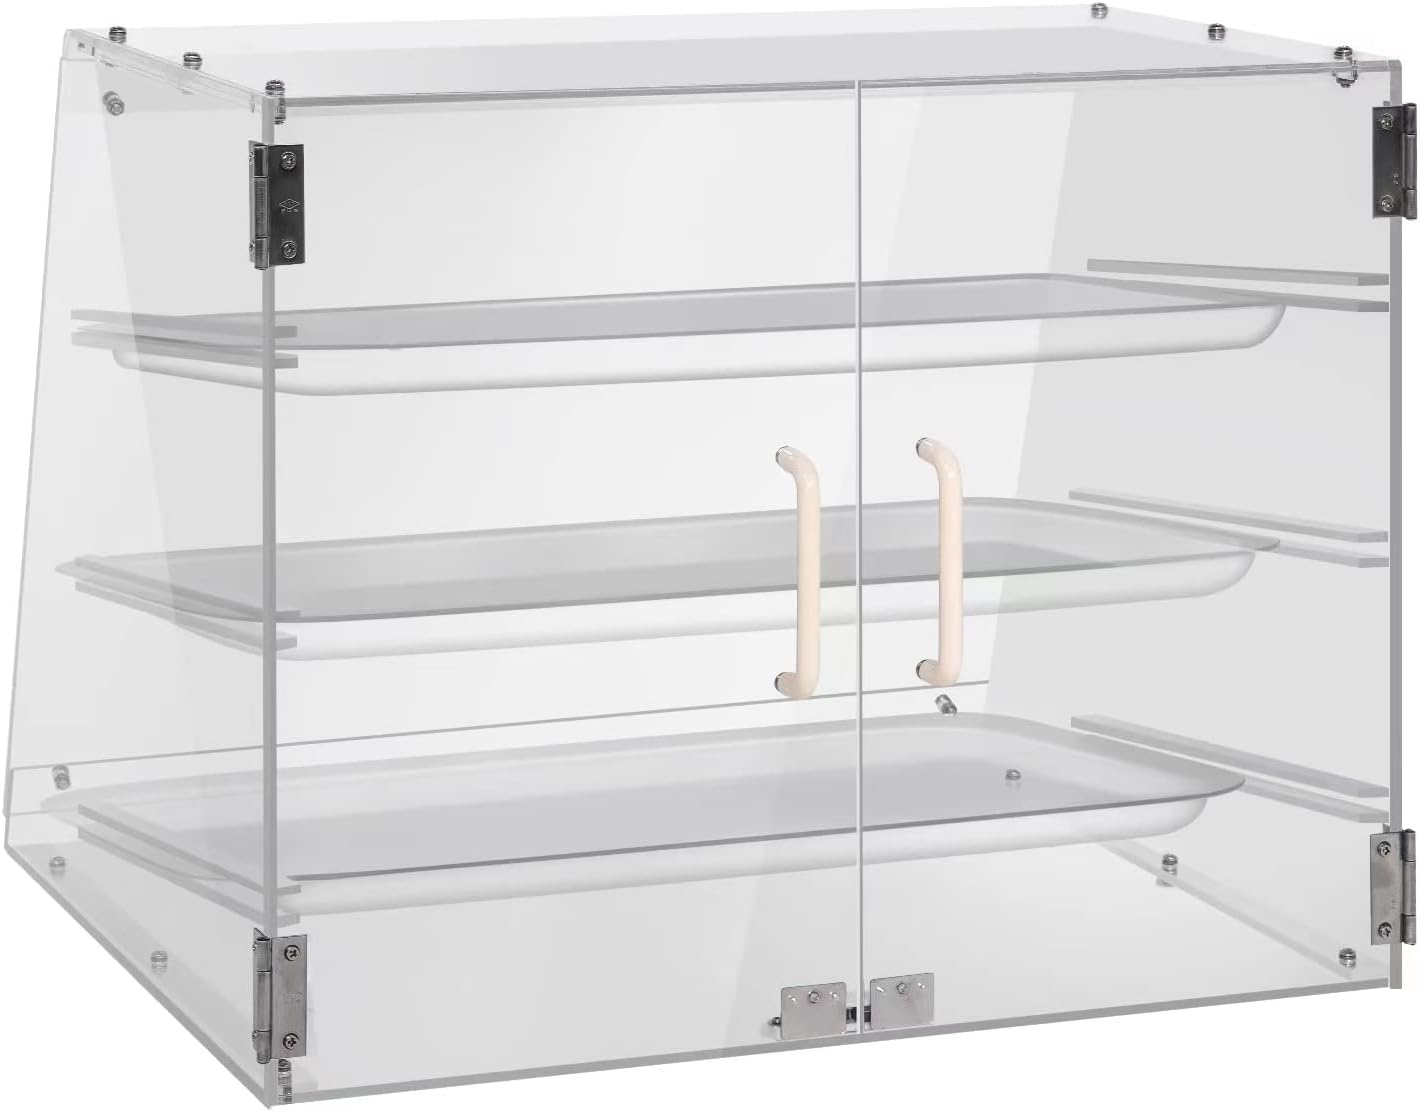 YBSVO 3 Tray Commercial Countertop Bakery Display Case with Rear Doors